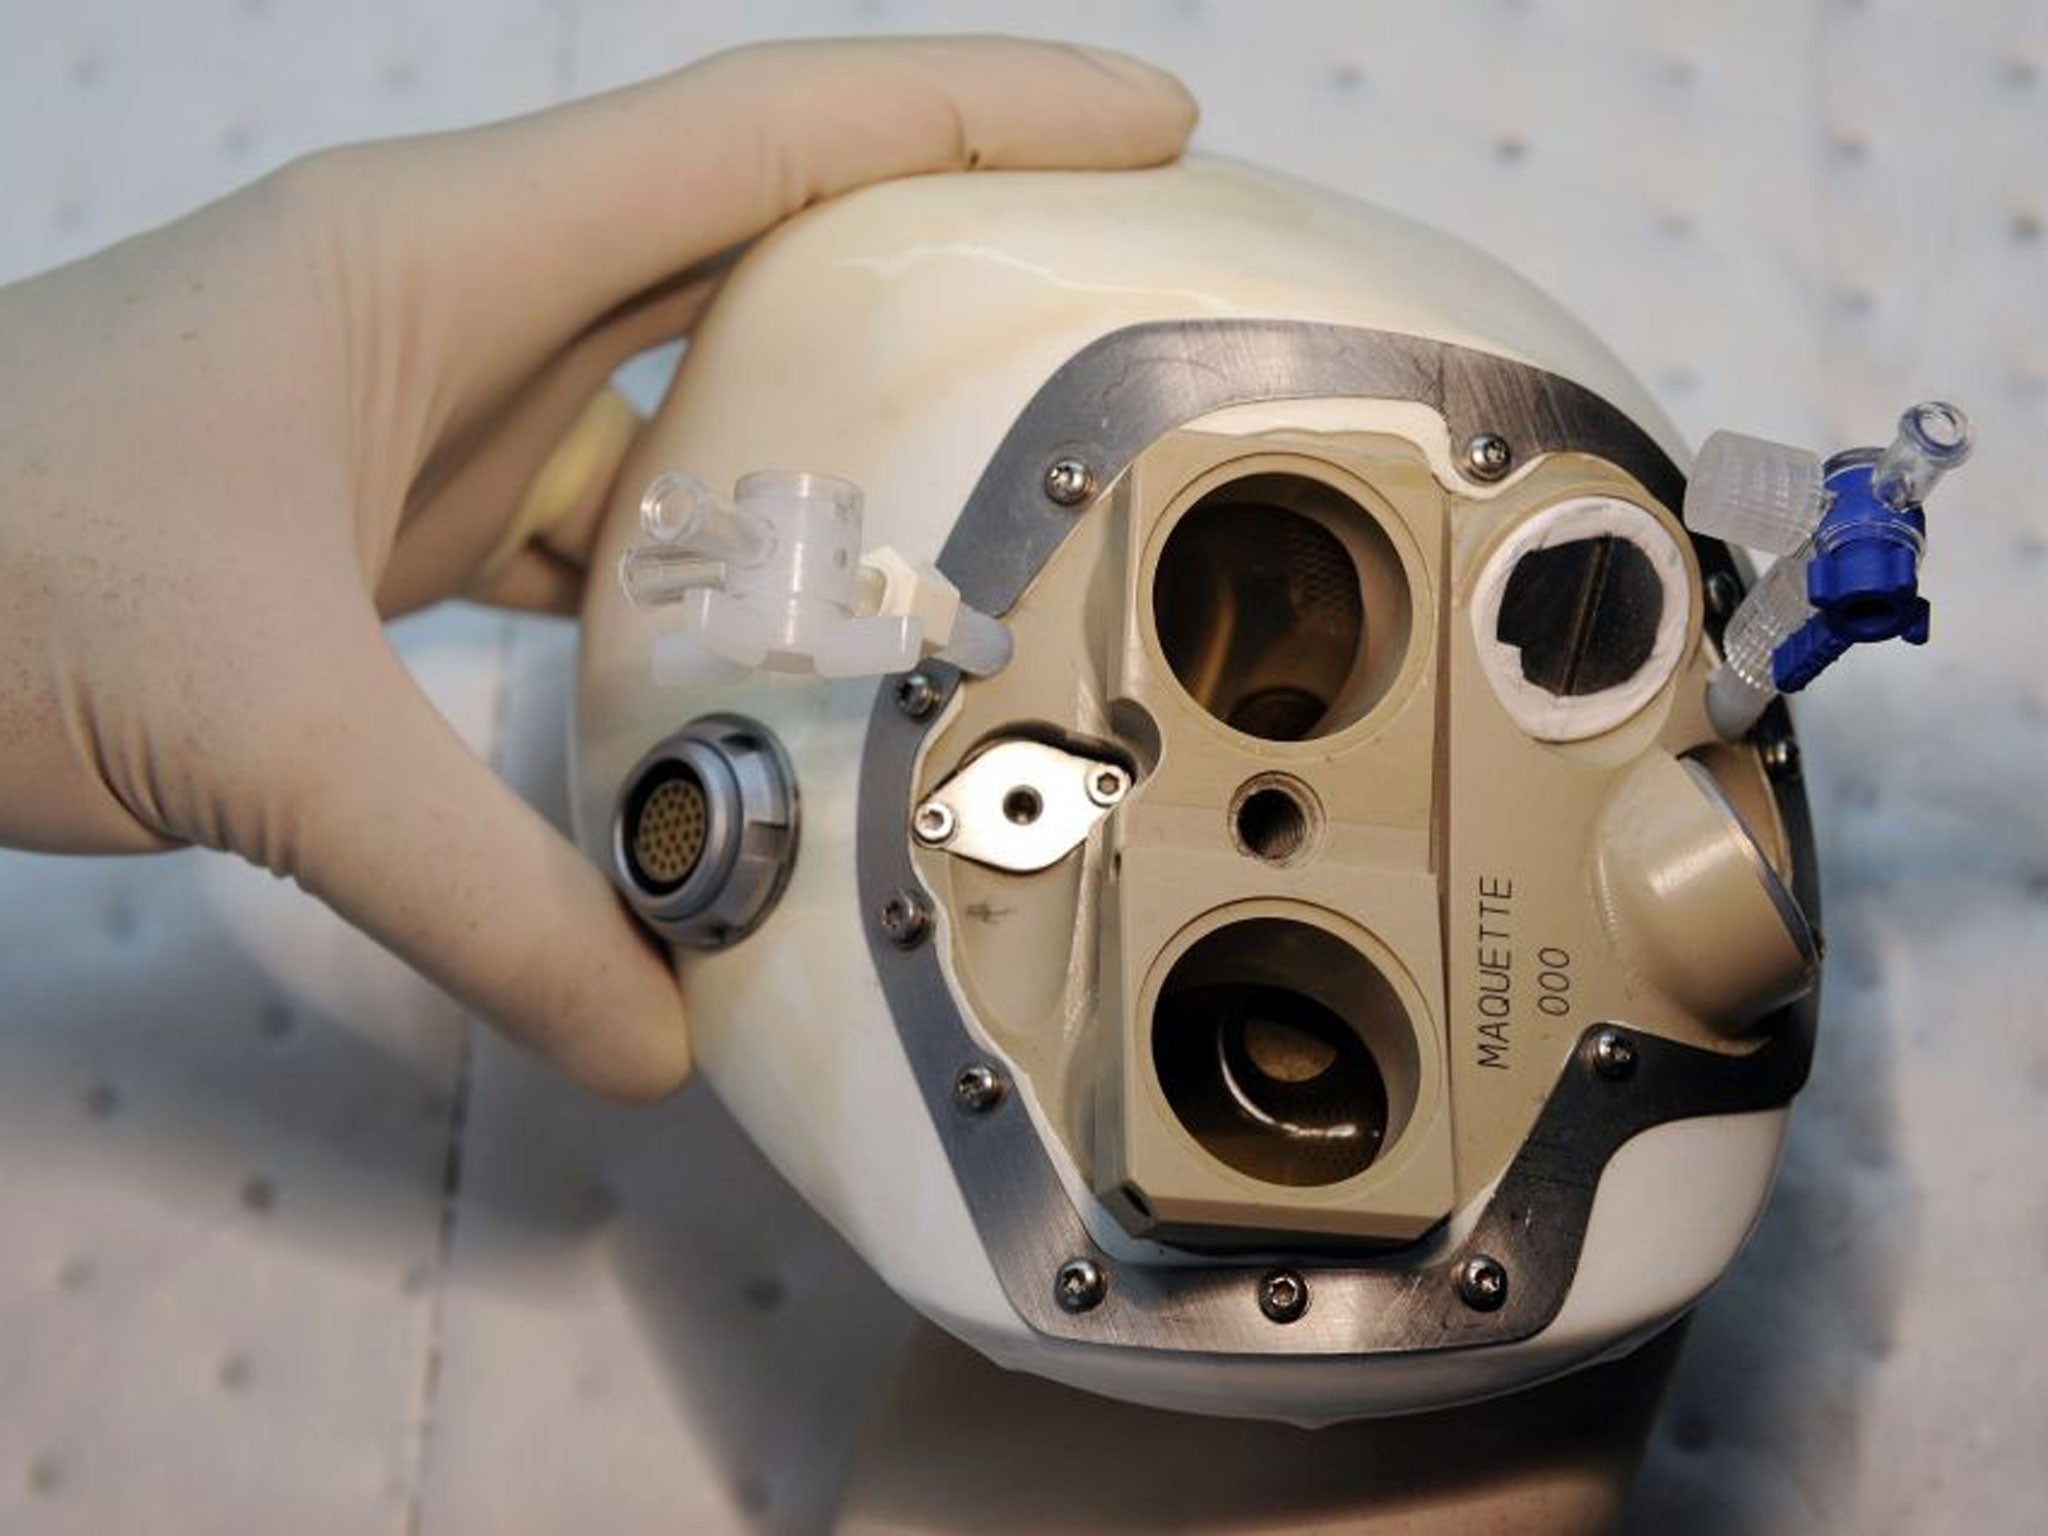 File photo shows an employee of the French company Carmat inspecting an artificial heart